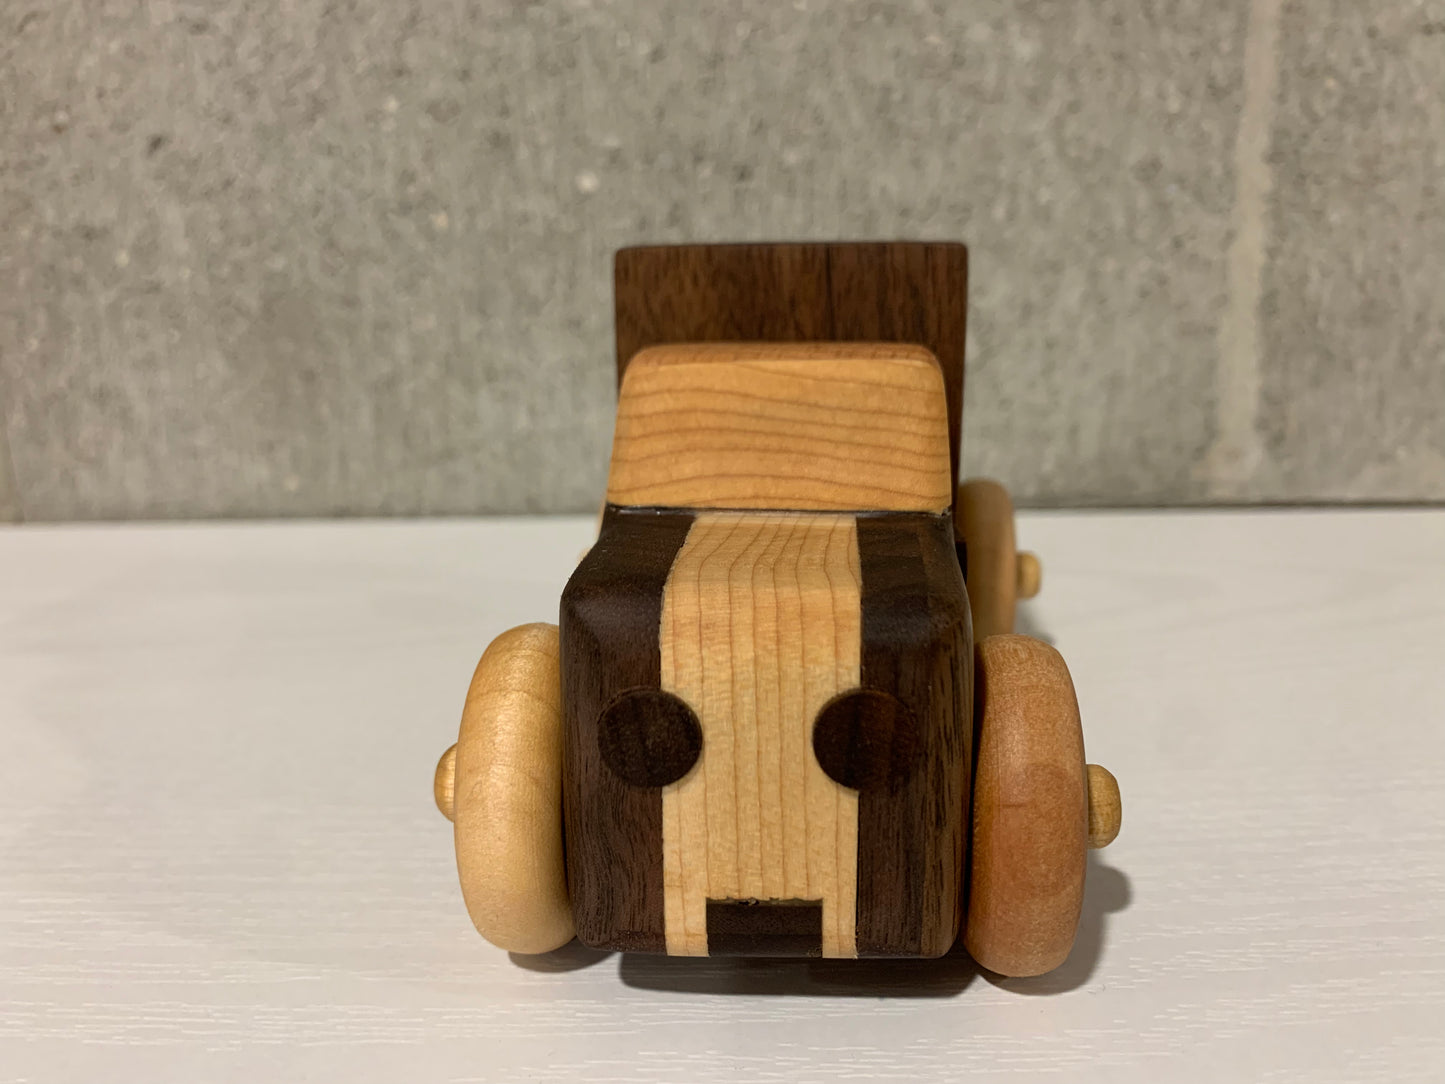 Wooden delivery Truck